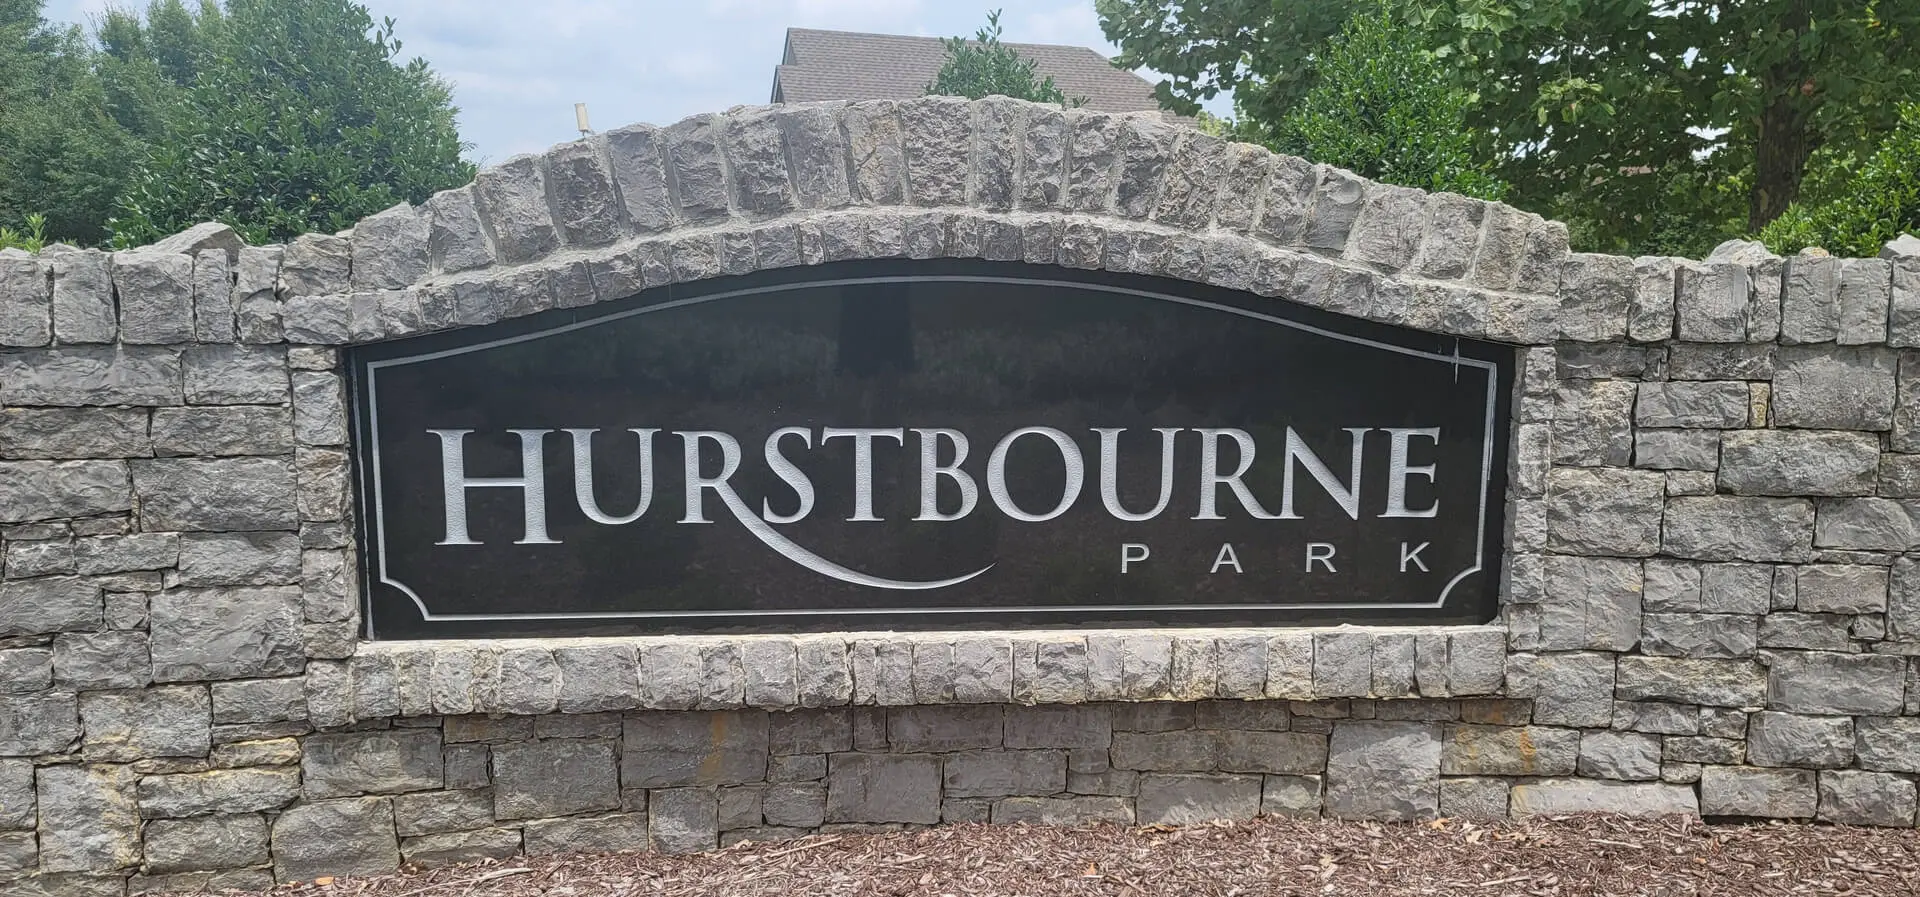 A signboard that says Hurstbourne park